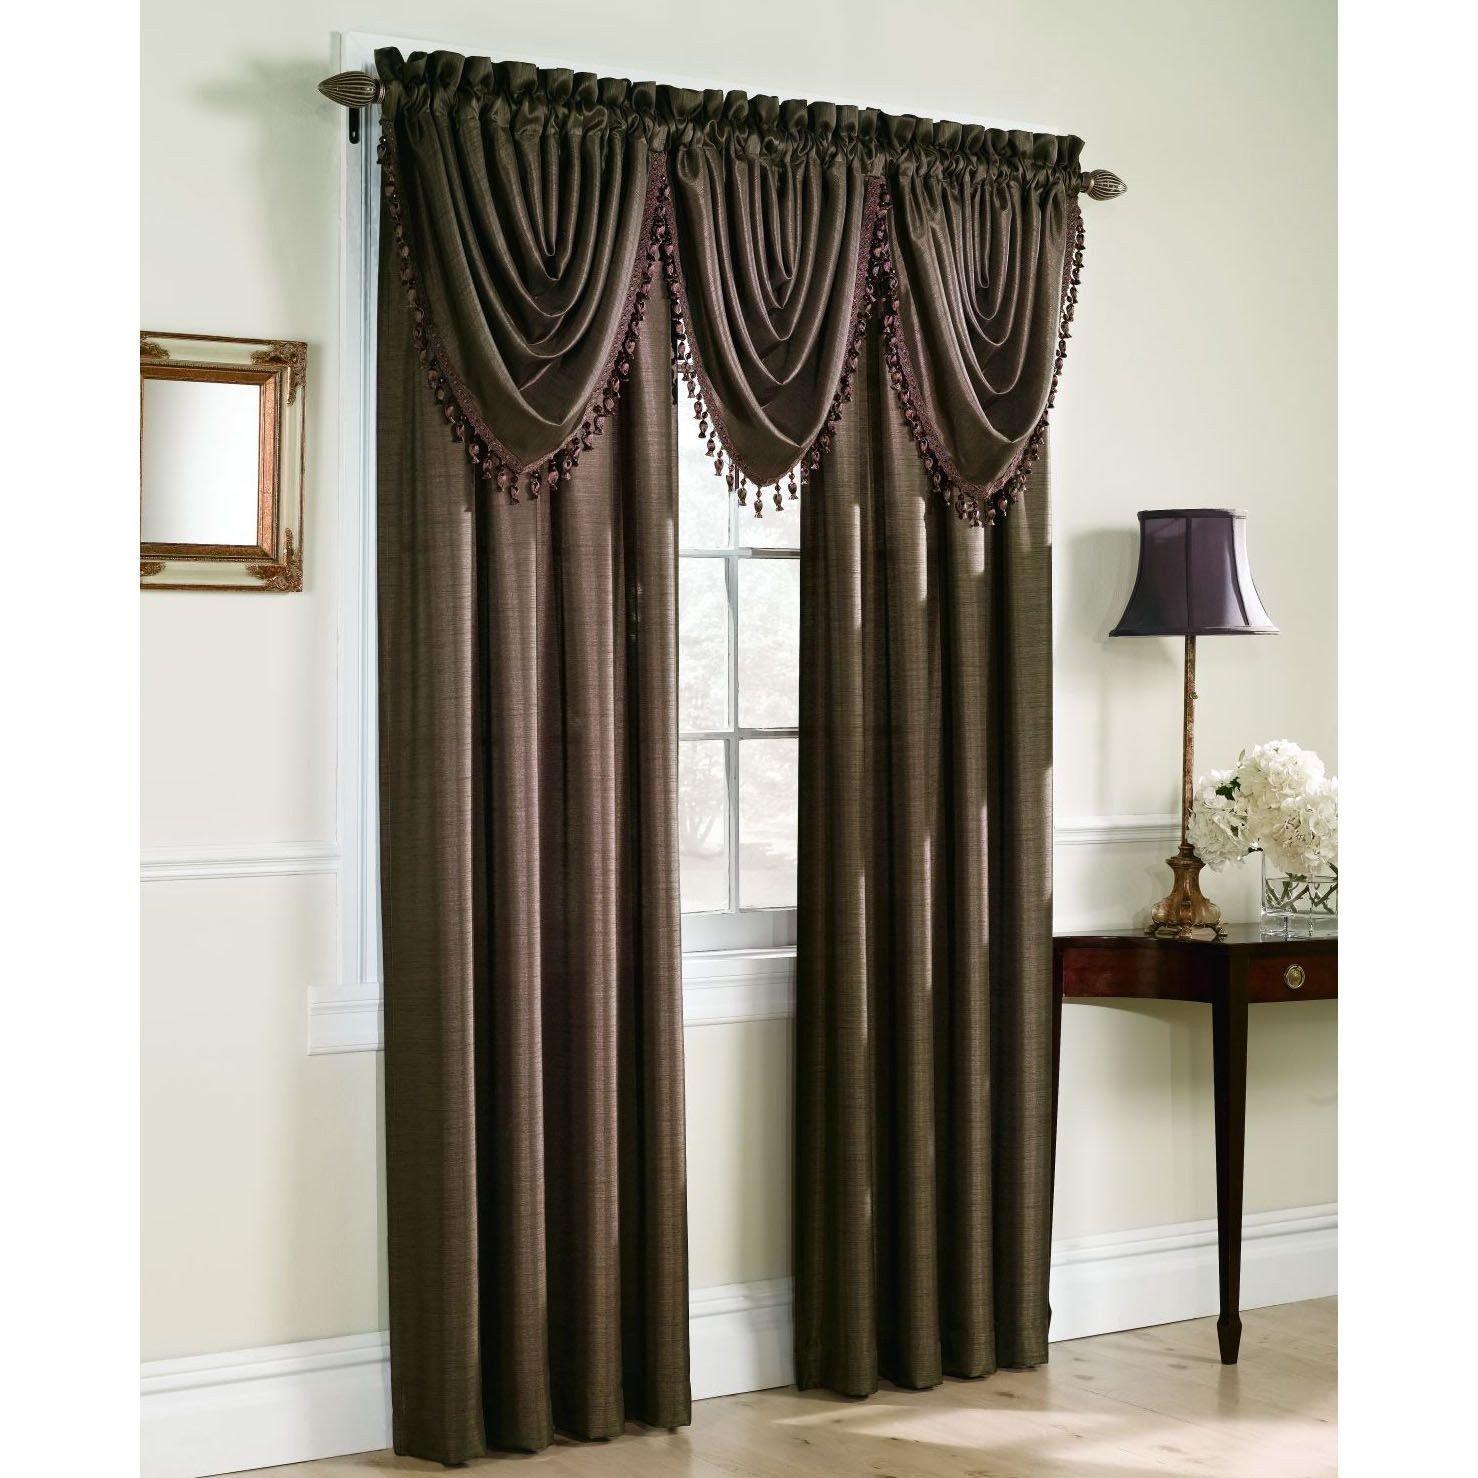 25 Favorite Sears Curtains for Living Room – Home, Family, Style and ...